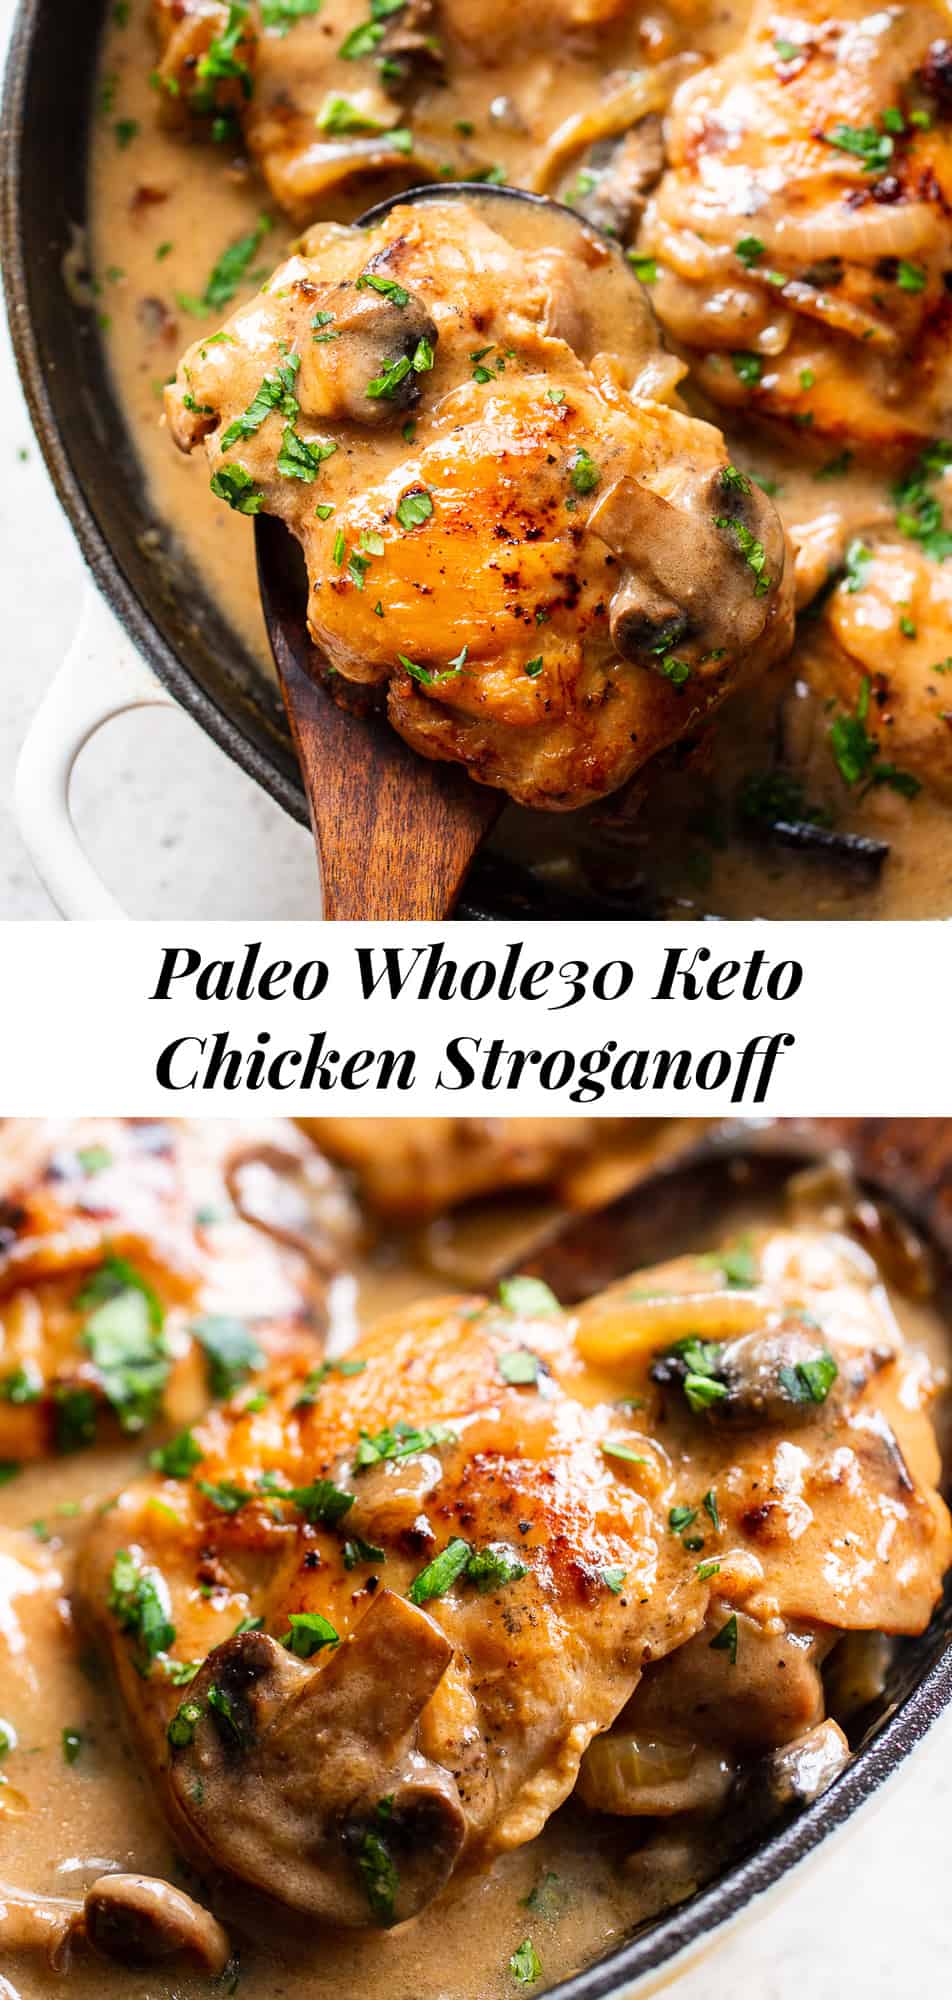 This hearty and savory paleo chicken stroganoff is made all in one skillet for a quick, delicious and cozy weeknight meal.  It’s Whole30, low carb and keto and delicious served over sautéed cauliflower rice, your favorite veggie noodles or roasted veggies. #paleo #whole30 #keto #lowcarb #cleaneating 